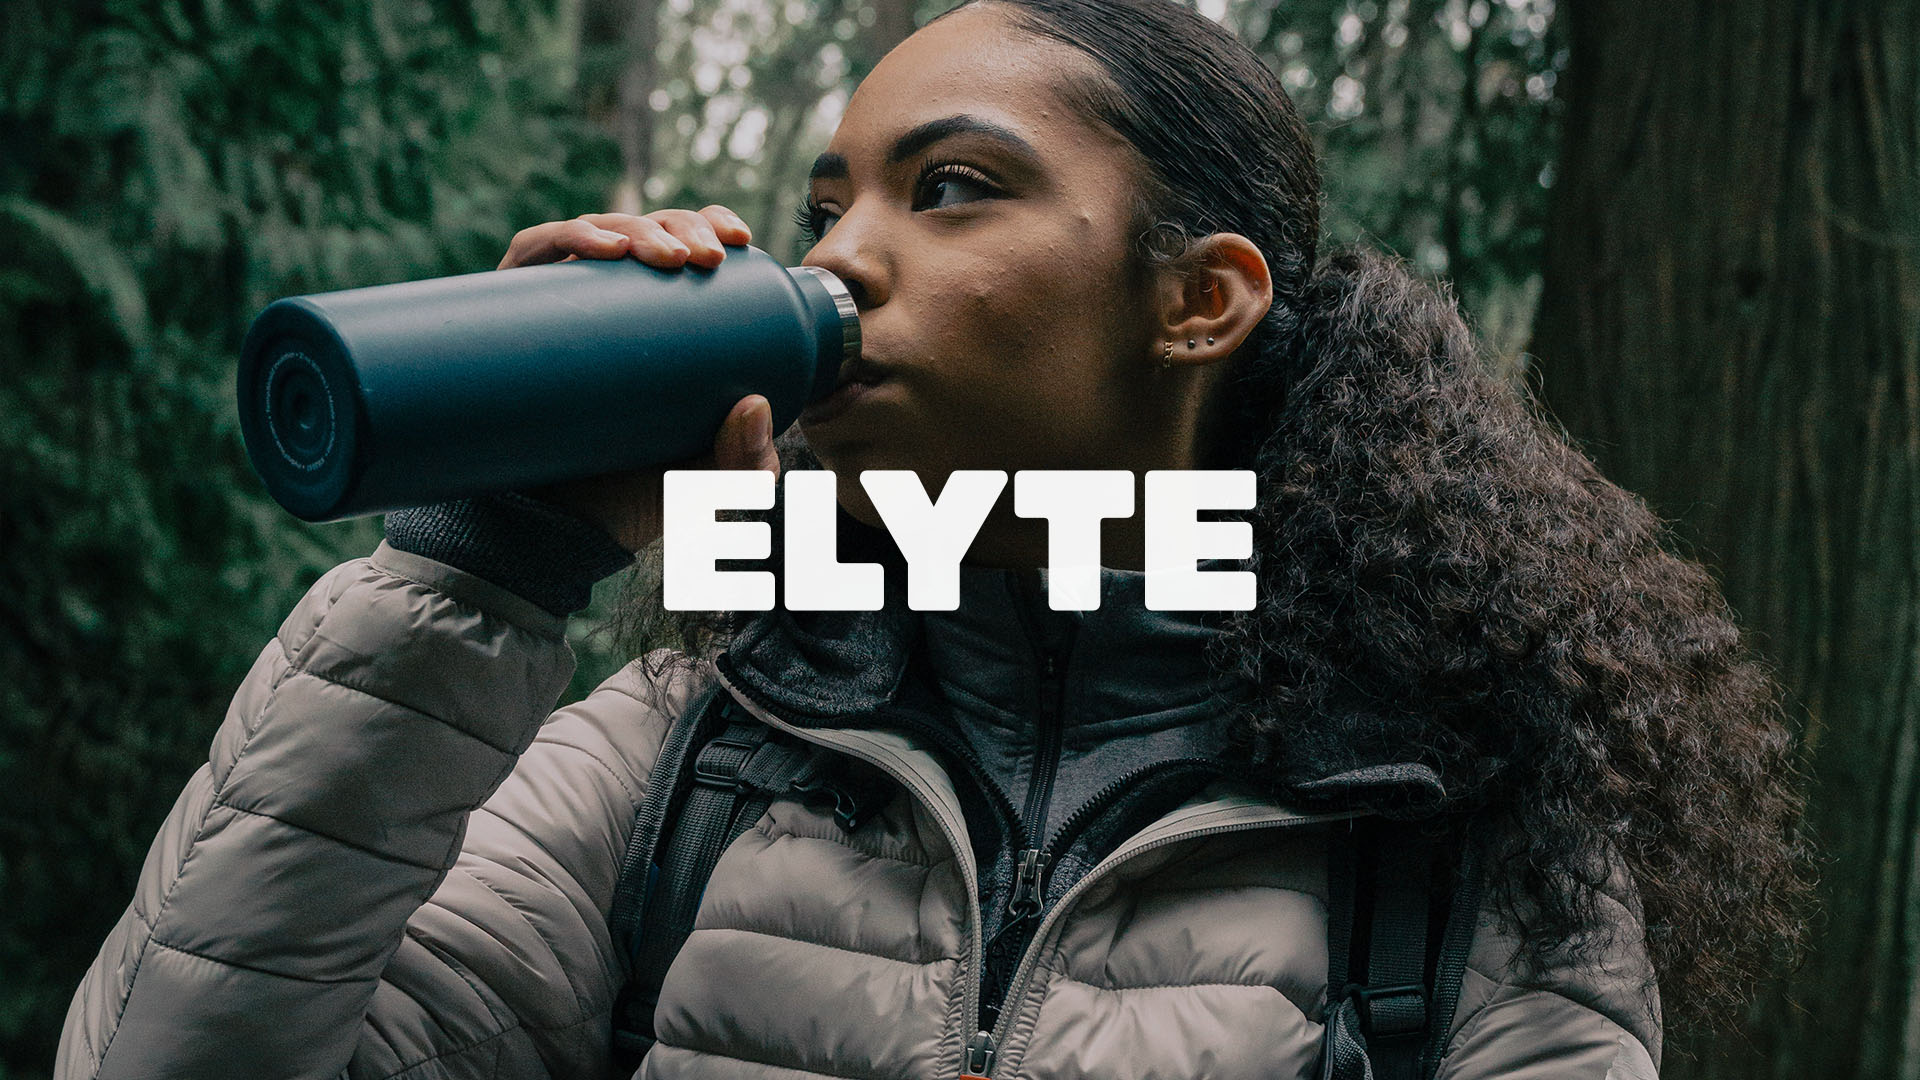 Elyte logotype in white on an image of a women drinking Elyte